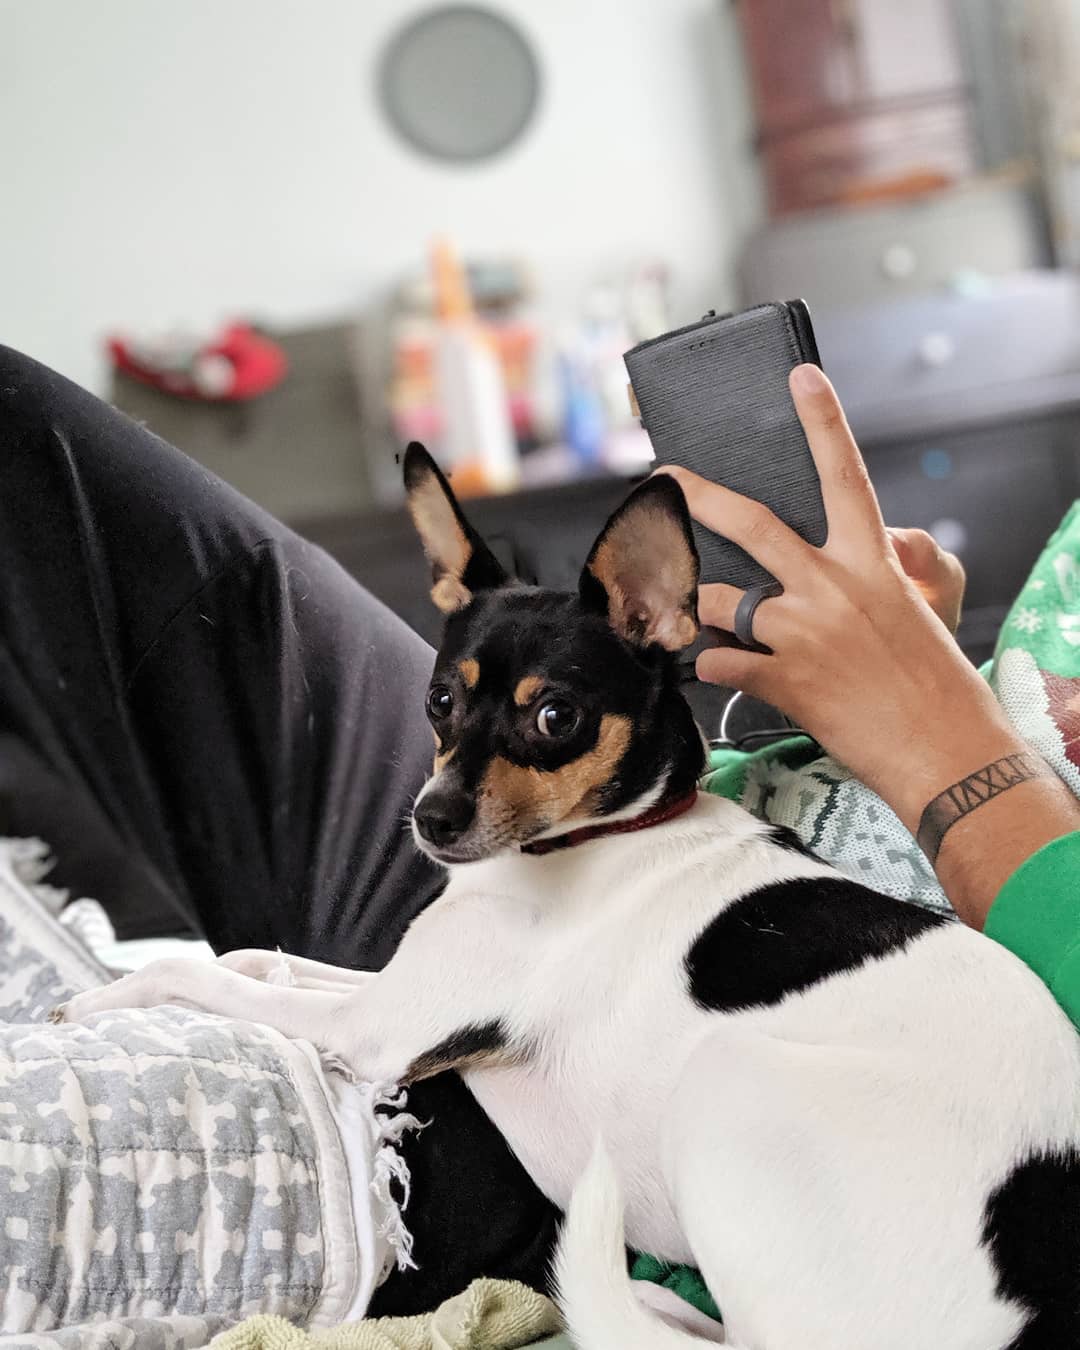 A Toy Fox Terrier lying on the couch beside man using his cellphone